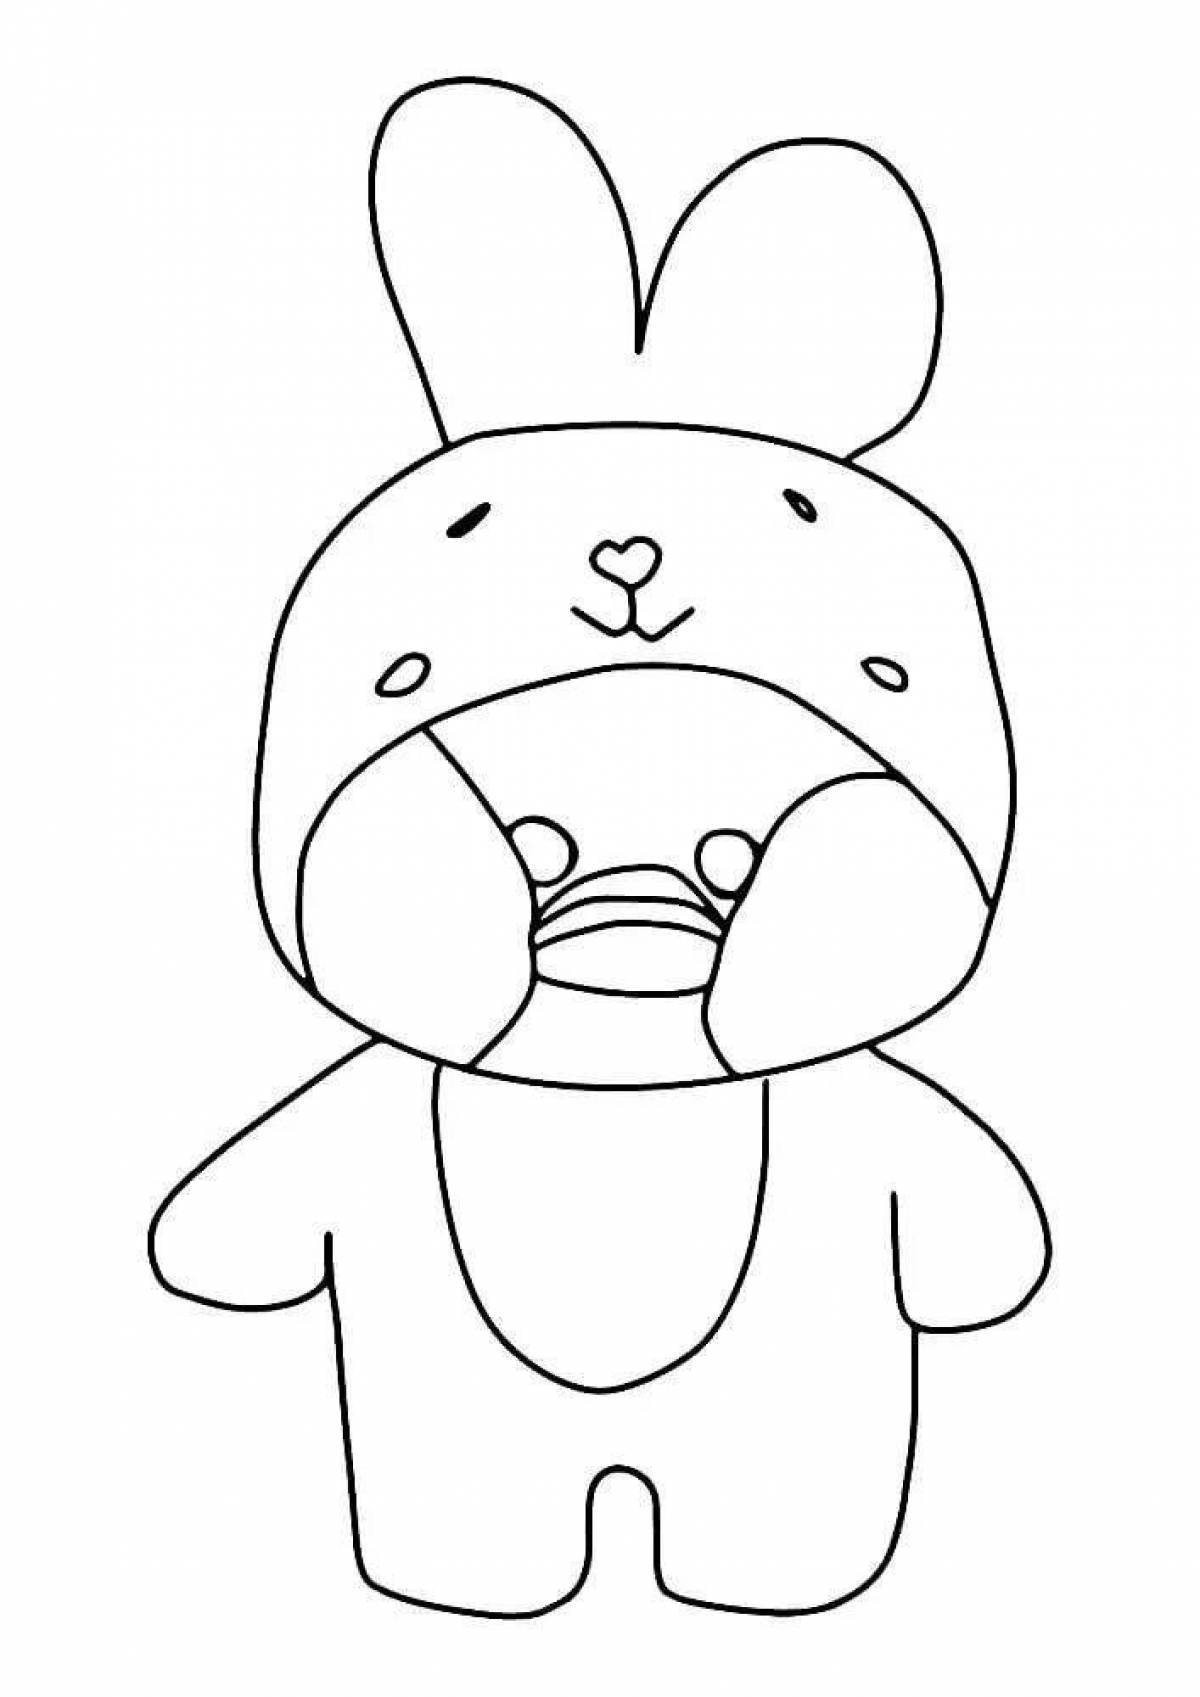 Fanfan duck coloring page